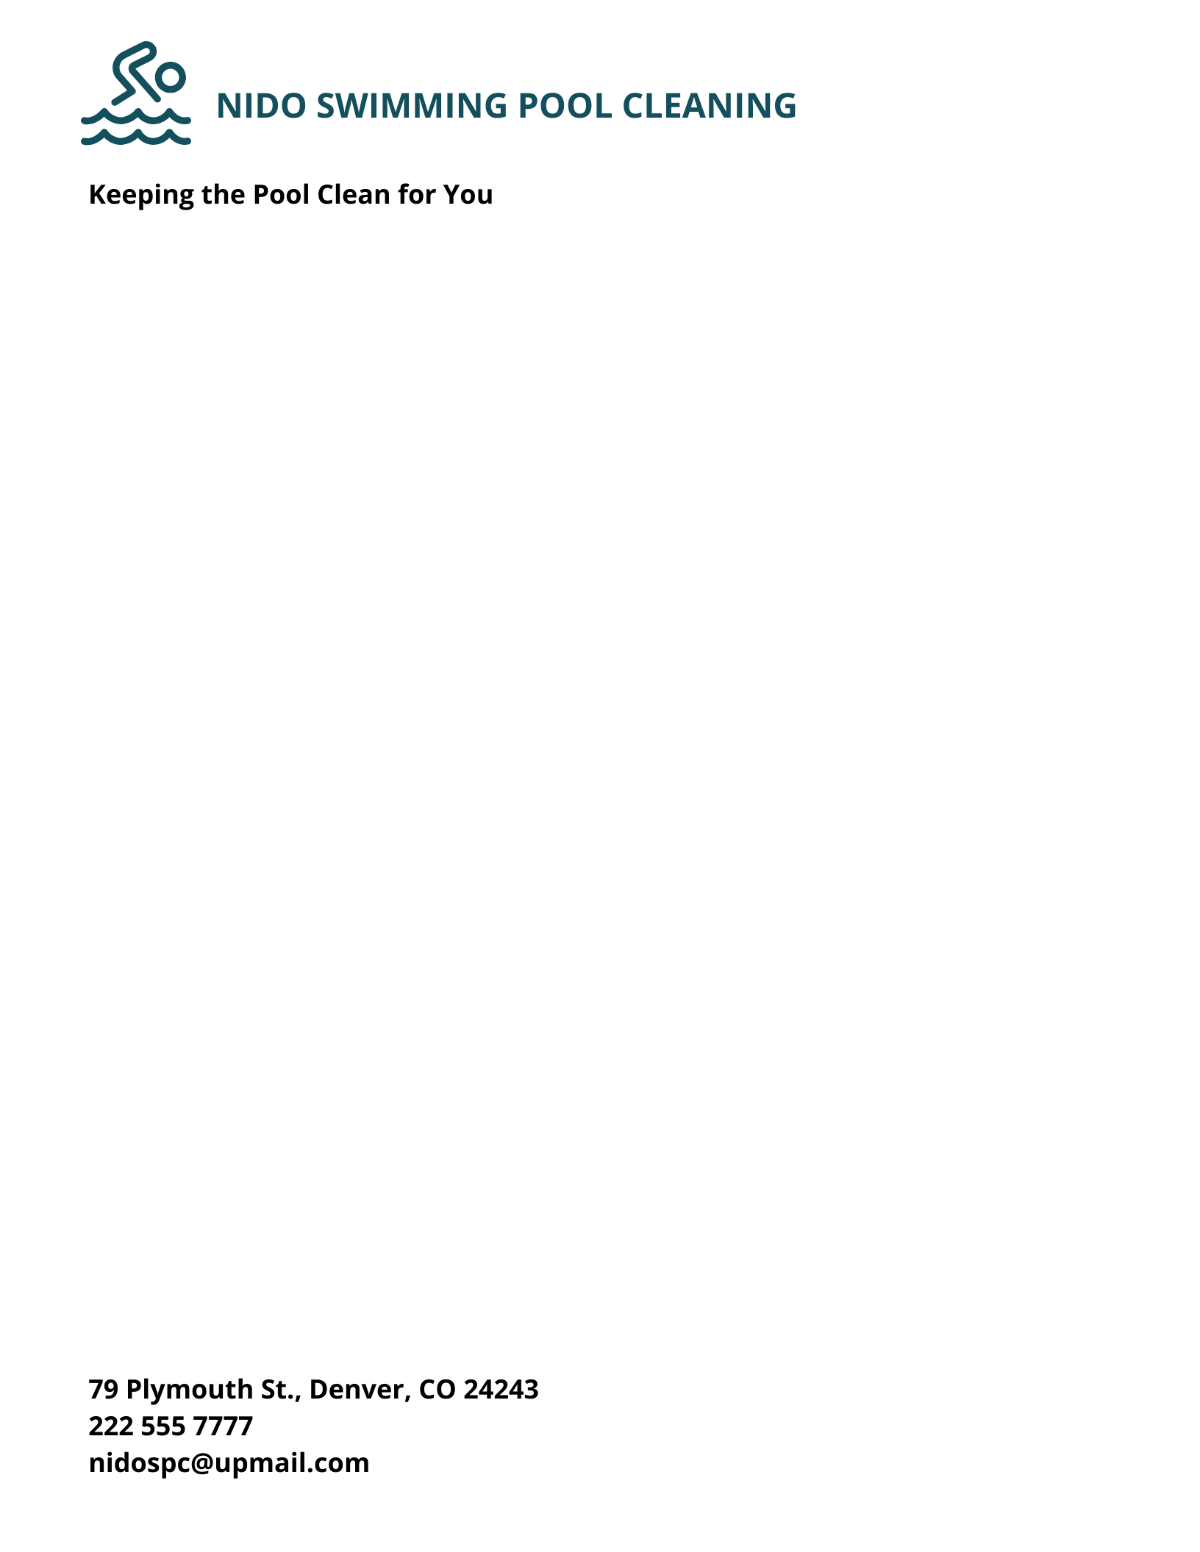 Swimming Pool Cleaning Service Letterhead